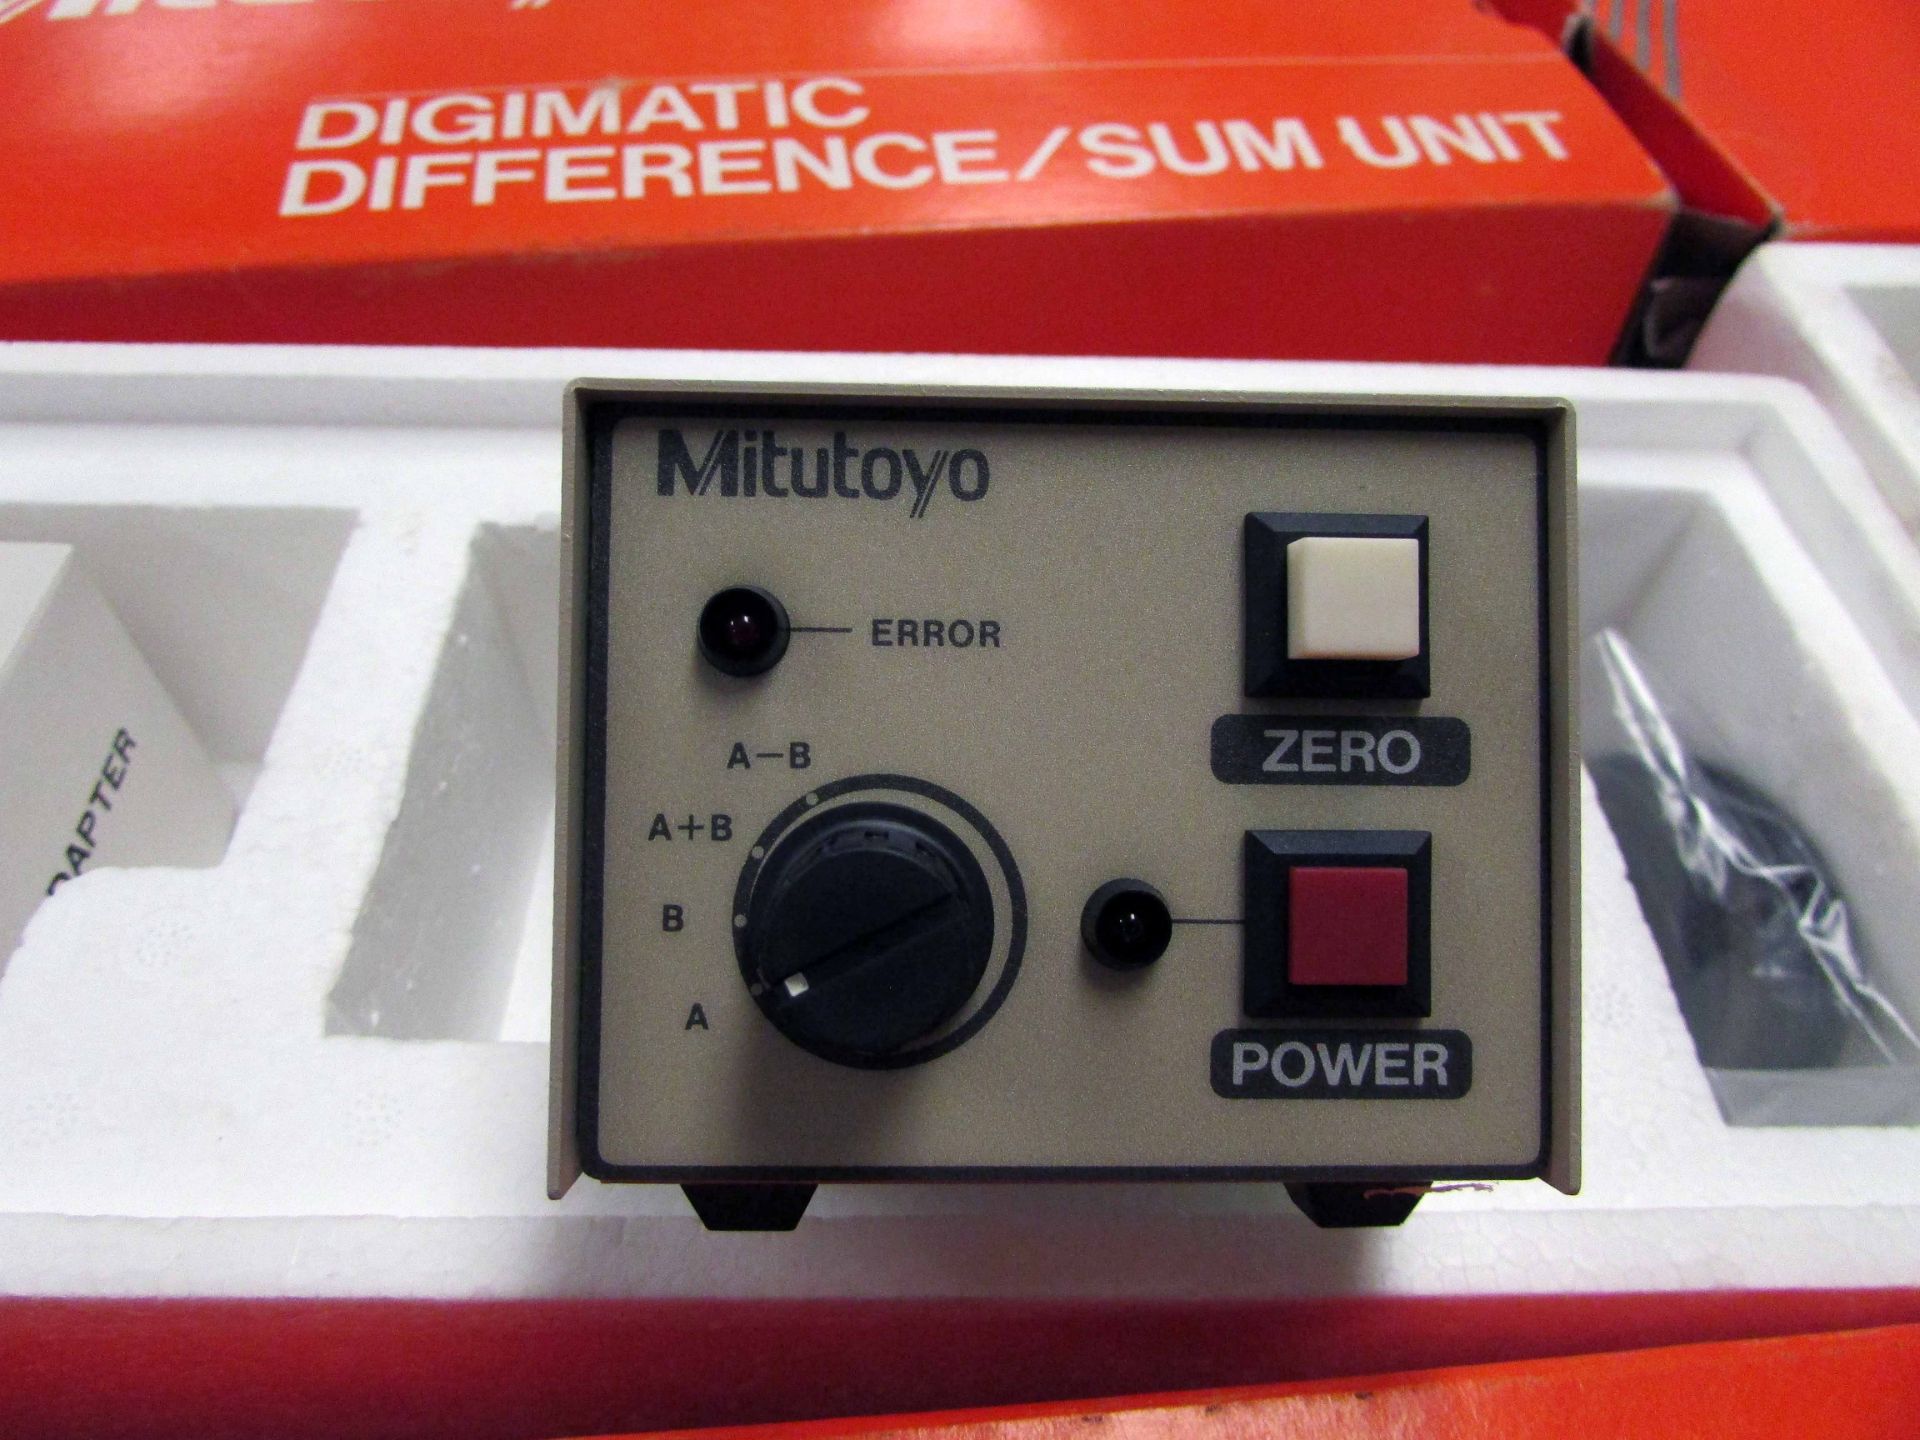 LOT OF DIGIMATIC MULTI UNIT, MITUTOYO MDL. SD-M1 (3), w/ (1) Mitutoyo SD-UI Digimatic difference/ - Image 5 of 5